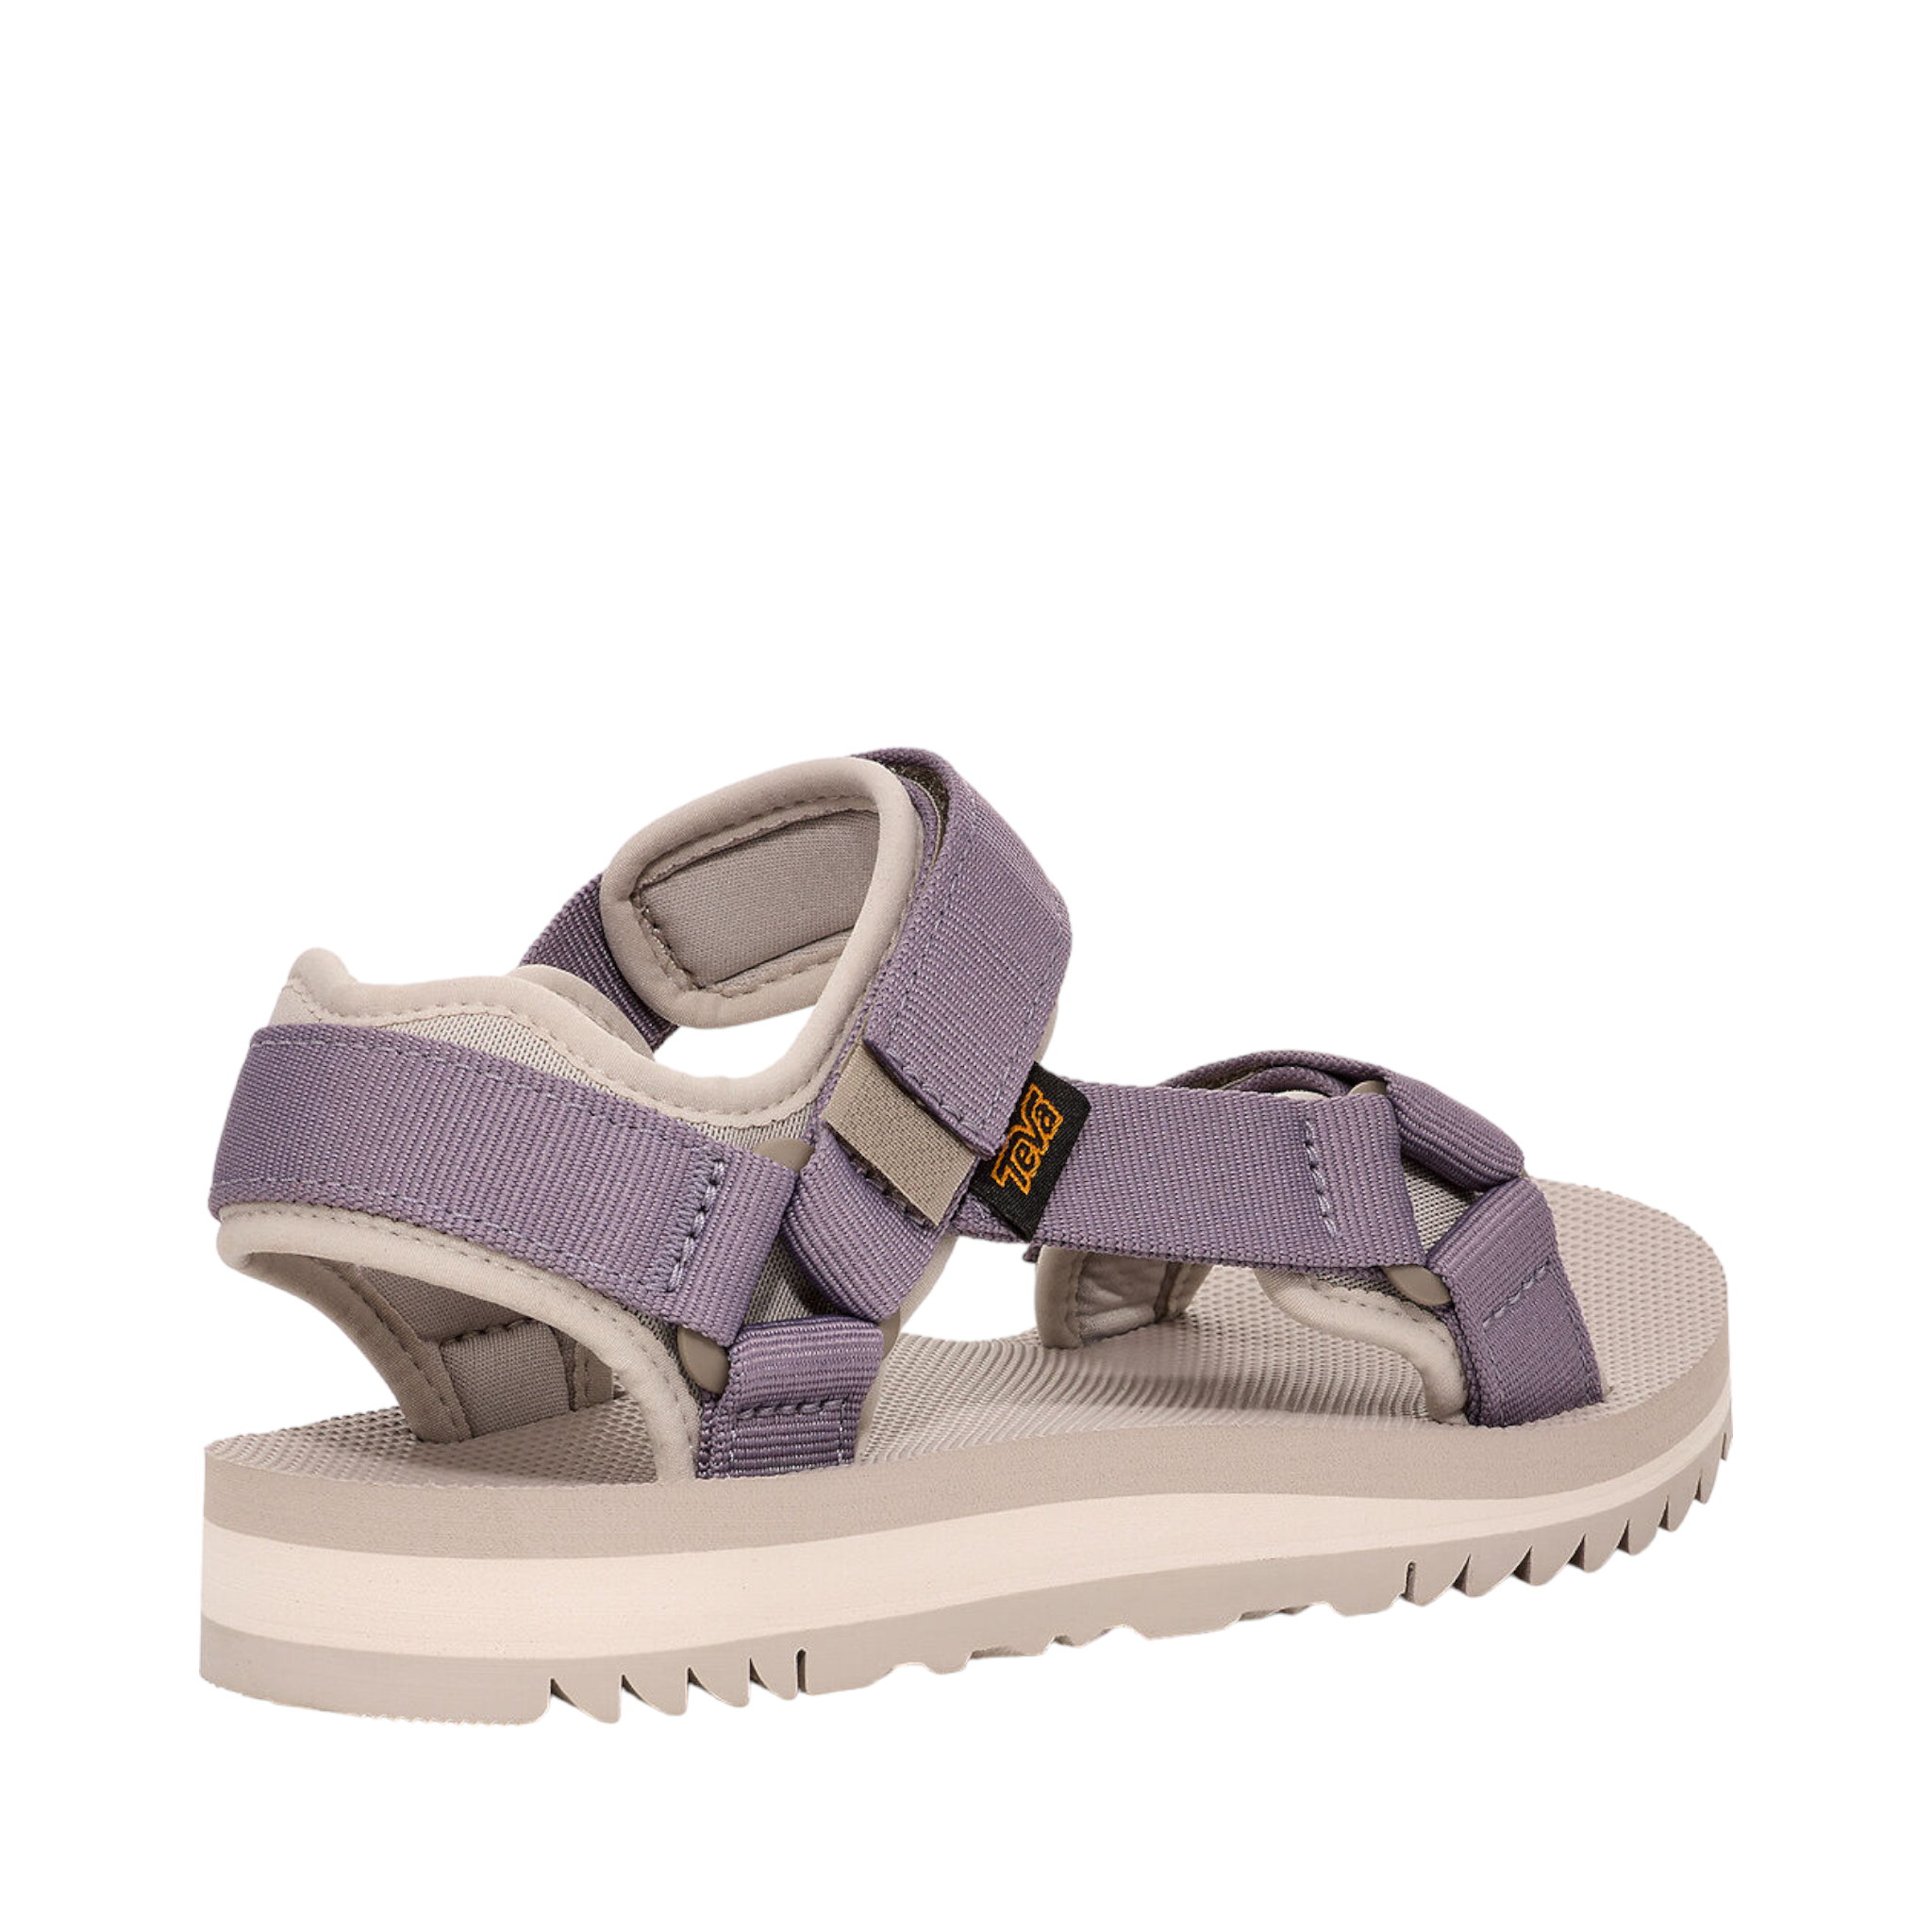 Shop W Universal Trail - with shoe&me - from Teva - Sandals - Sandal, Summer, Womens